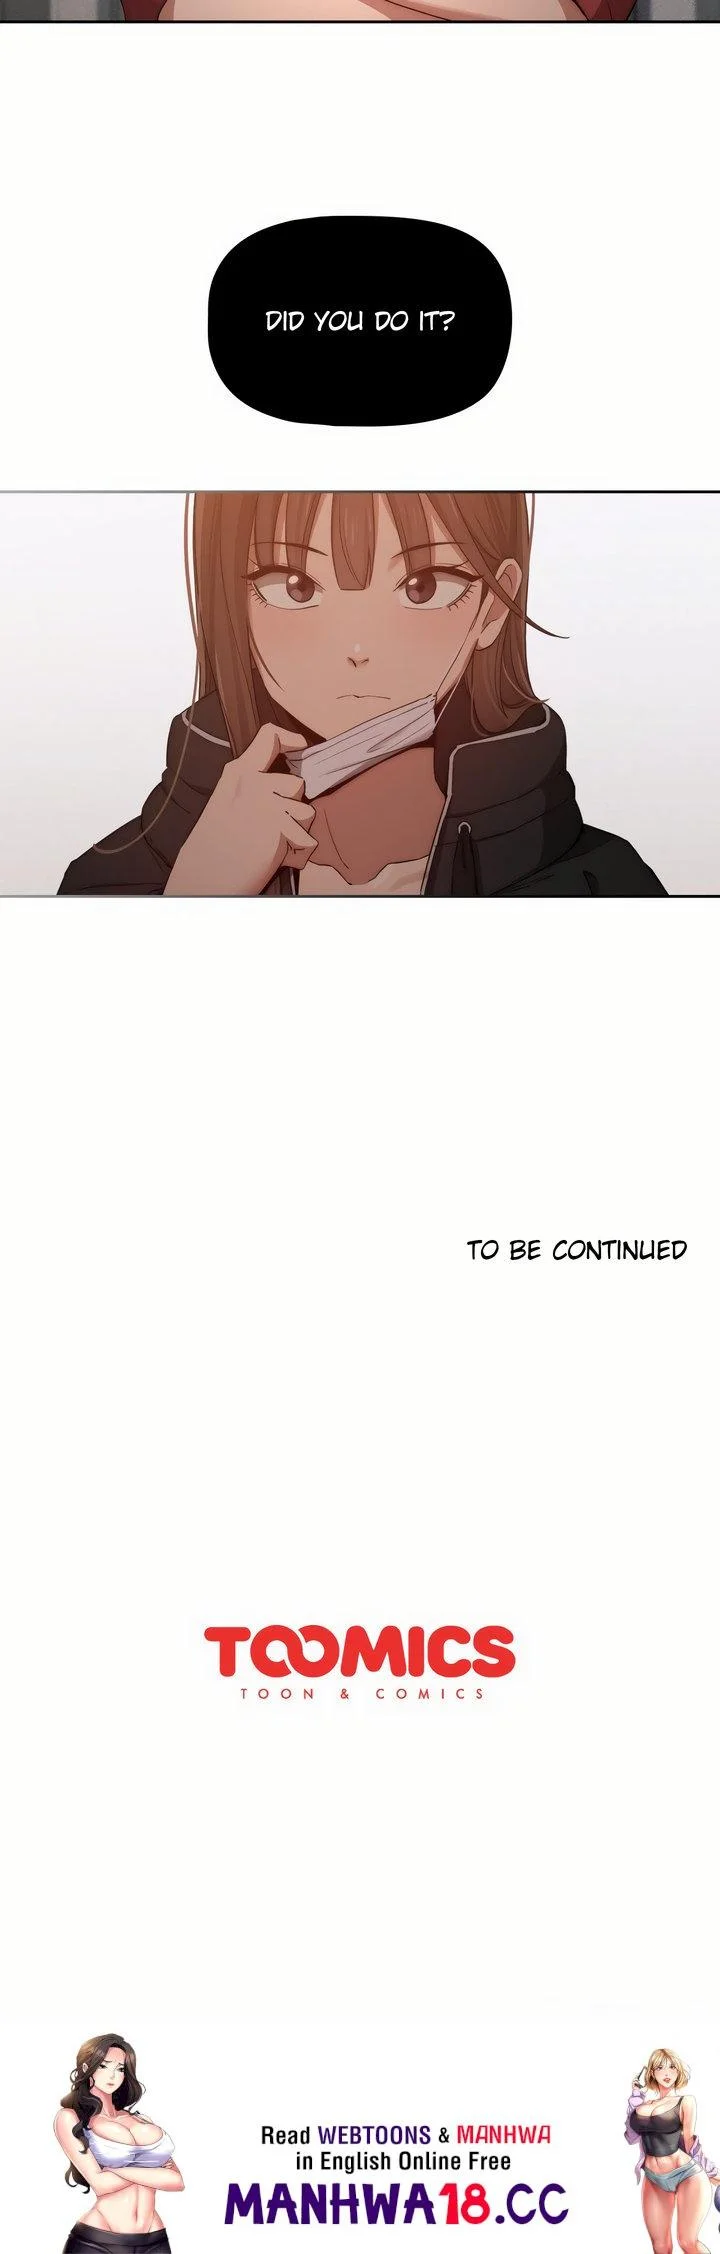 private-tutoring-in-these-trying-times-chap-33-19